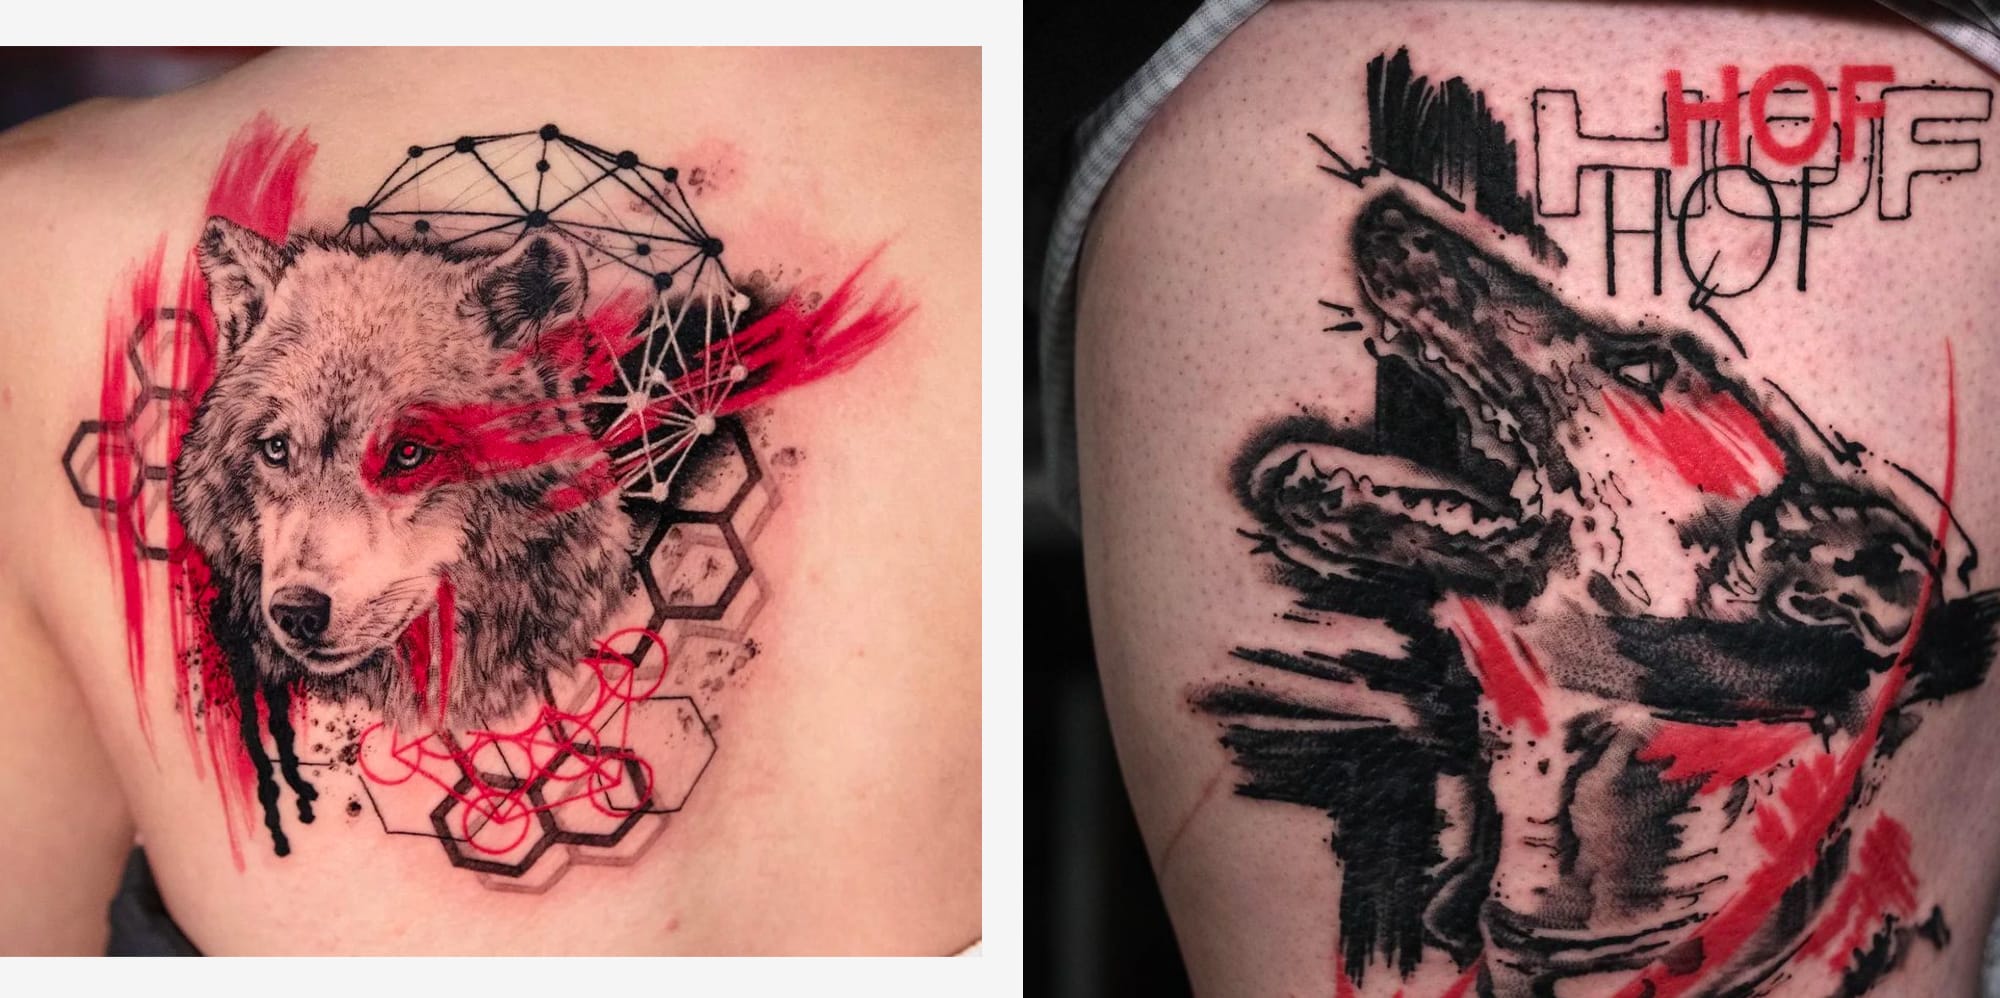 Trash Polka, Abstract, Color, Geometric tattoo by